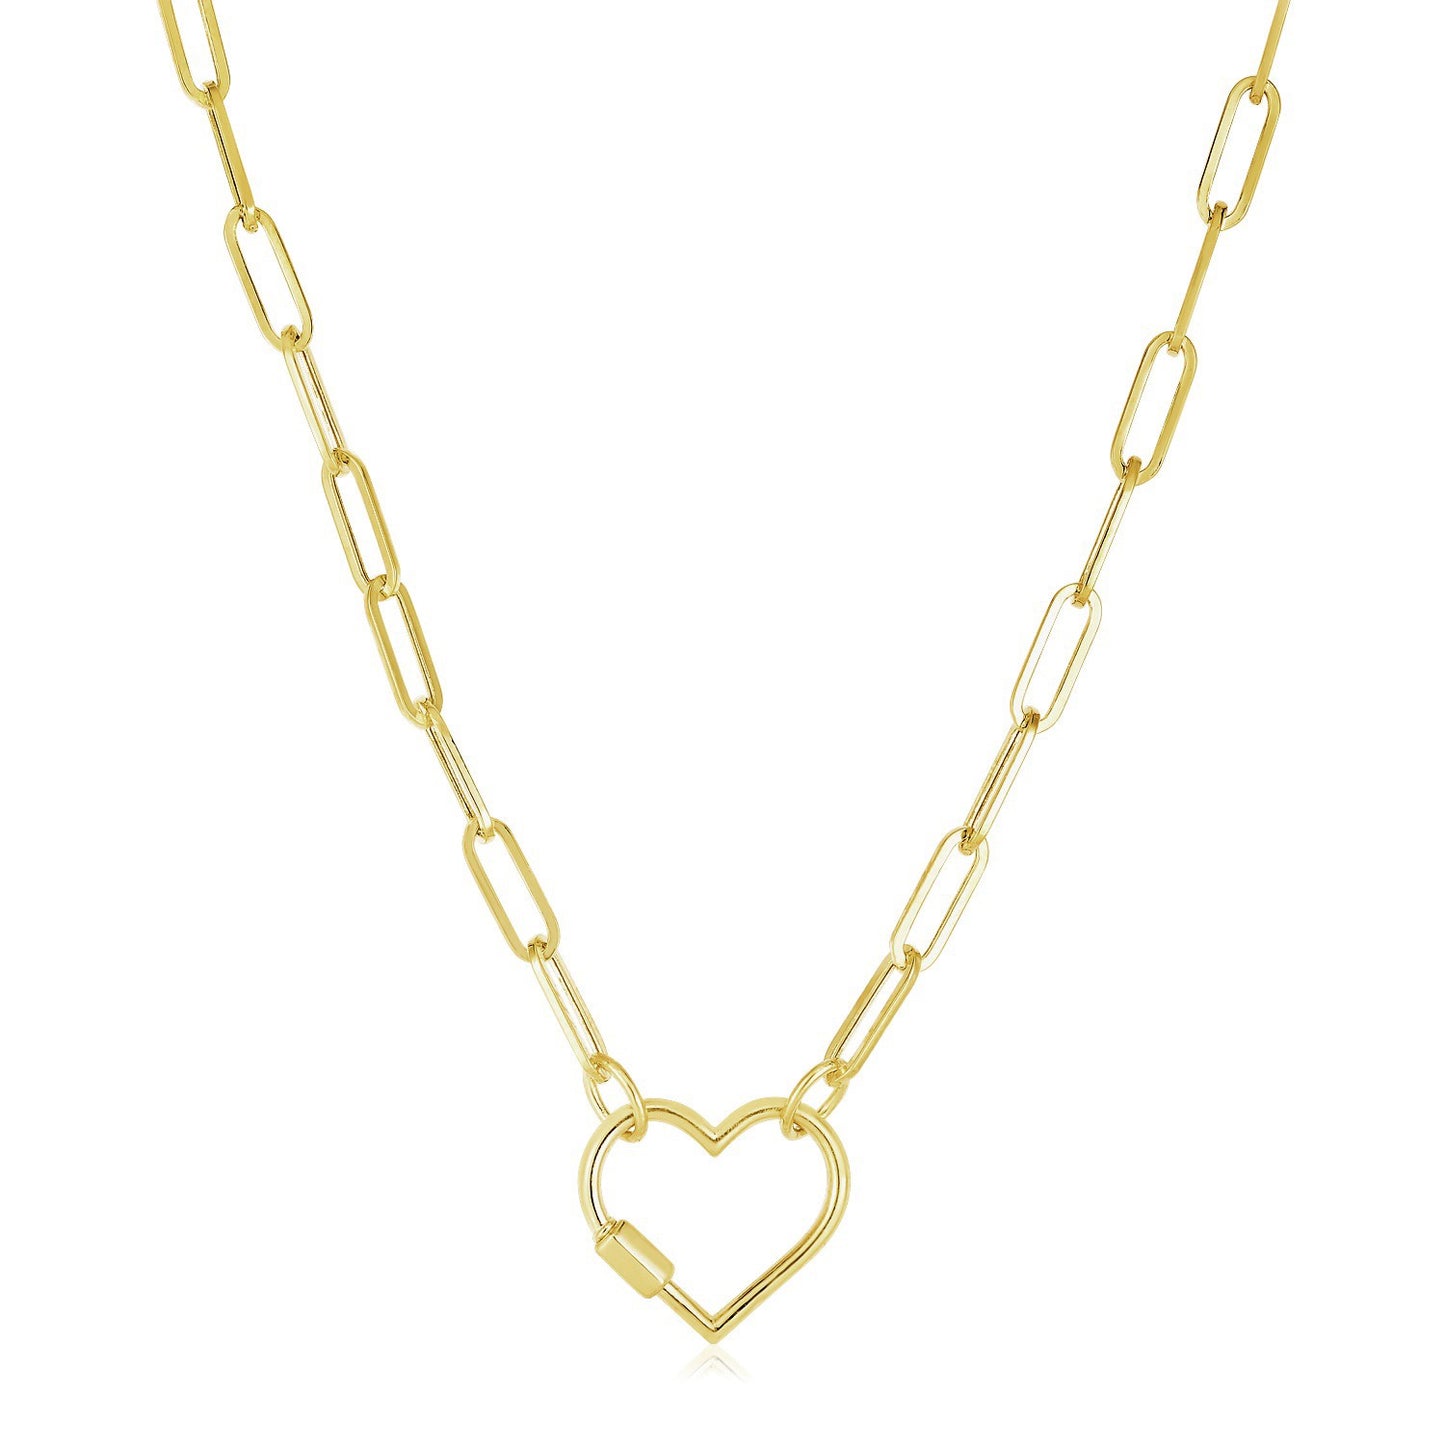 14k Yellow Gold Paperclip Chain Necklace with Heart Carabiner Clasp